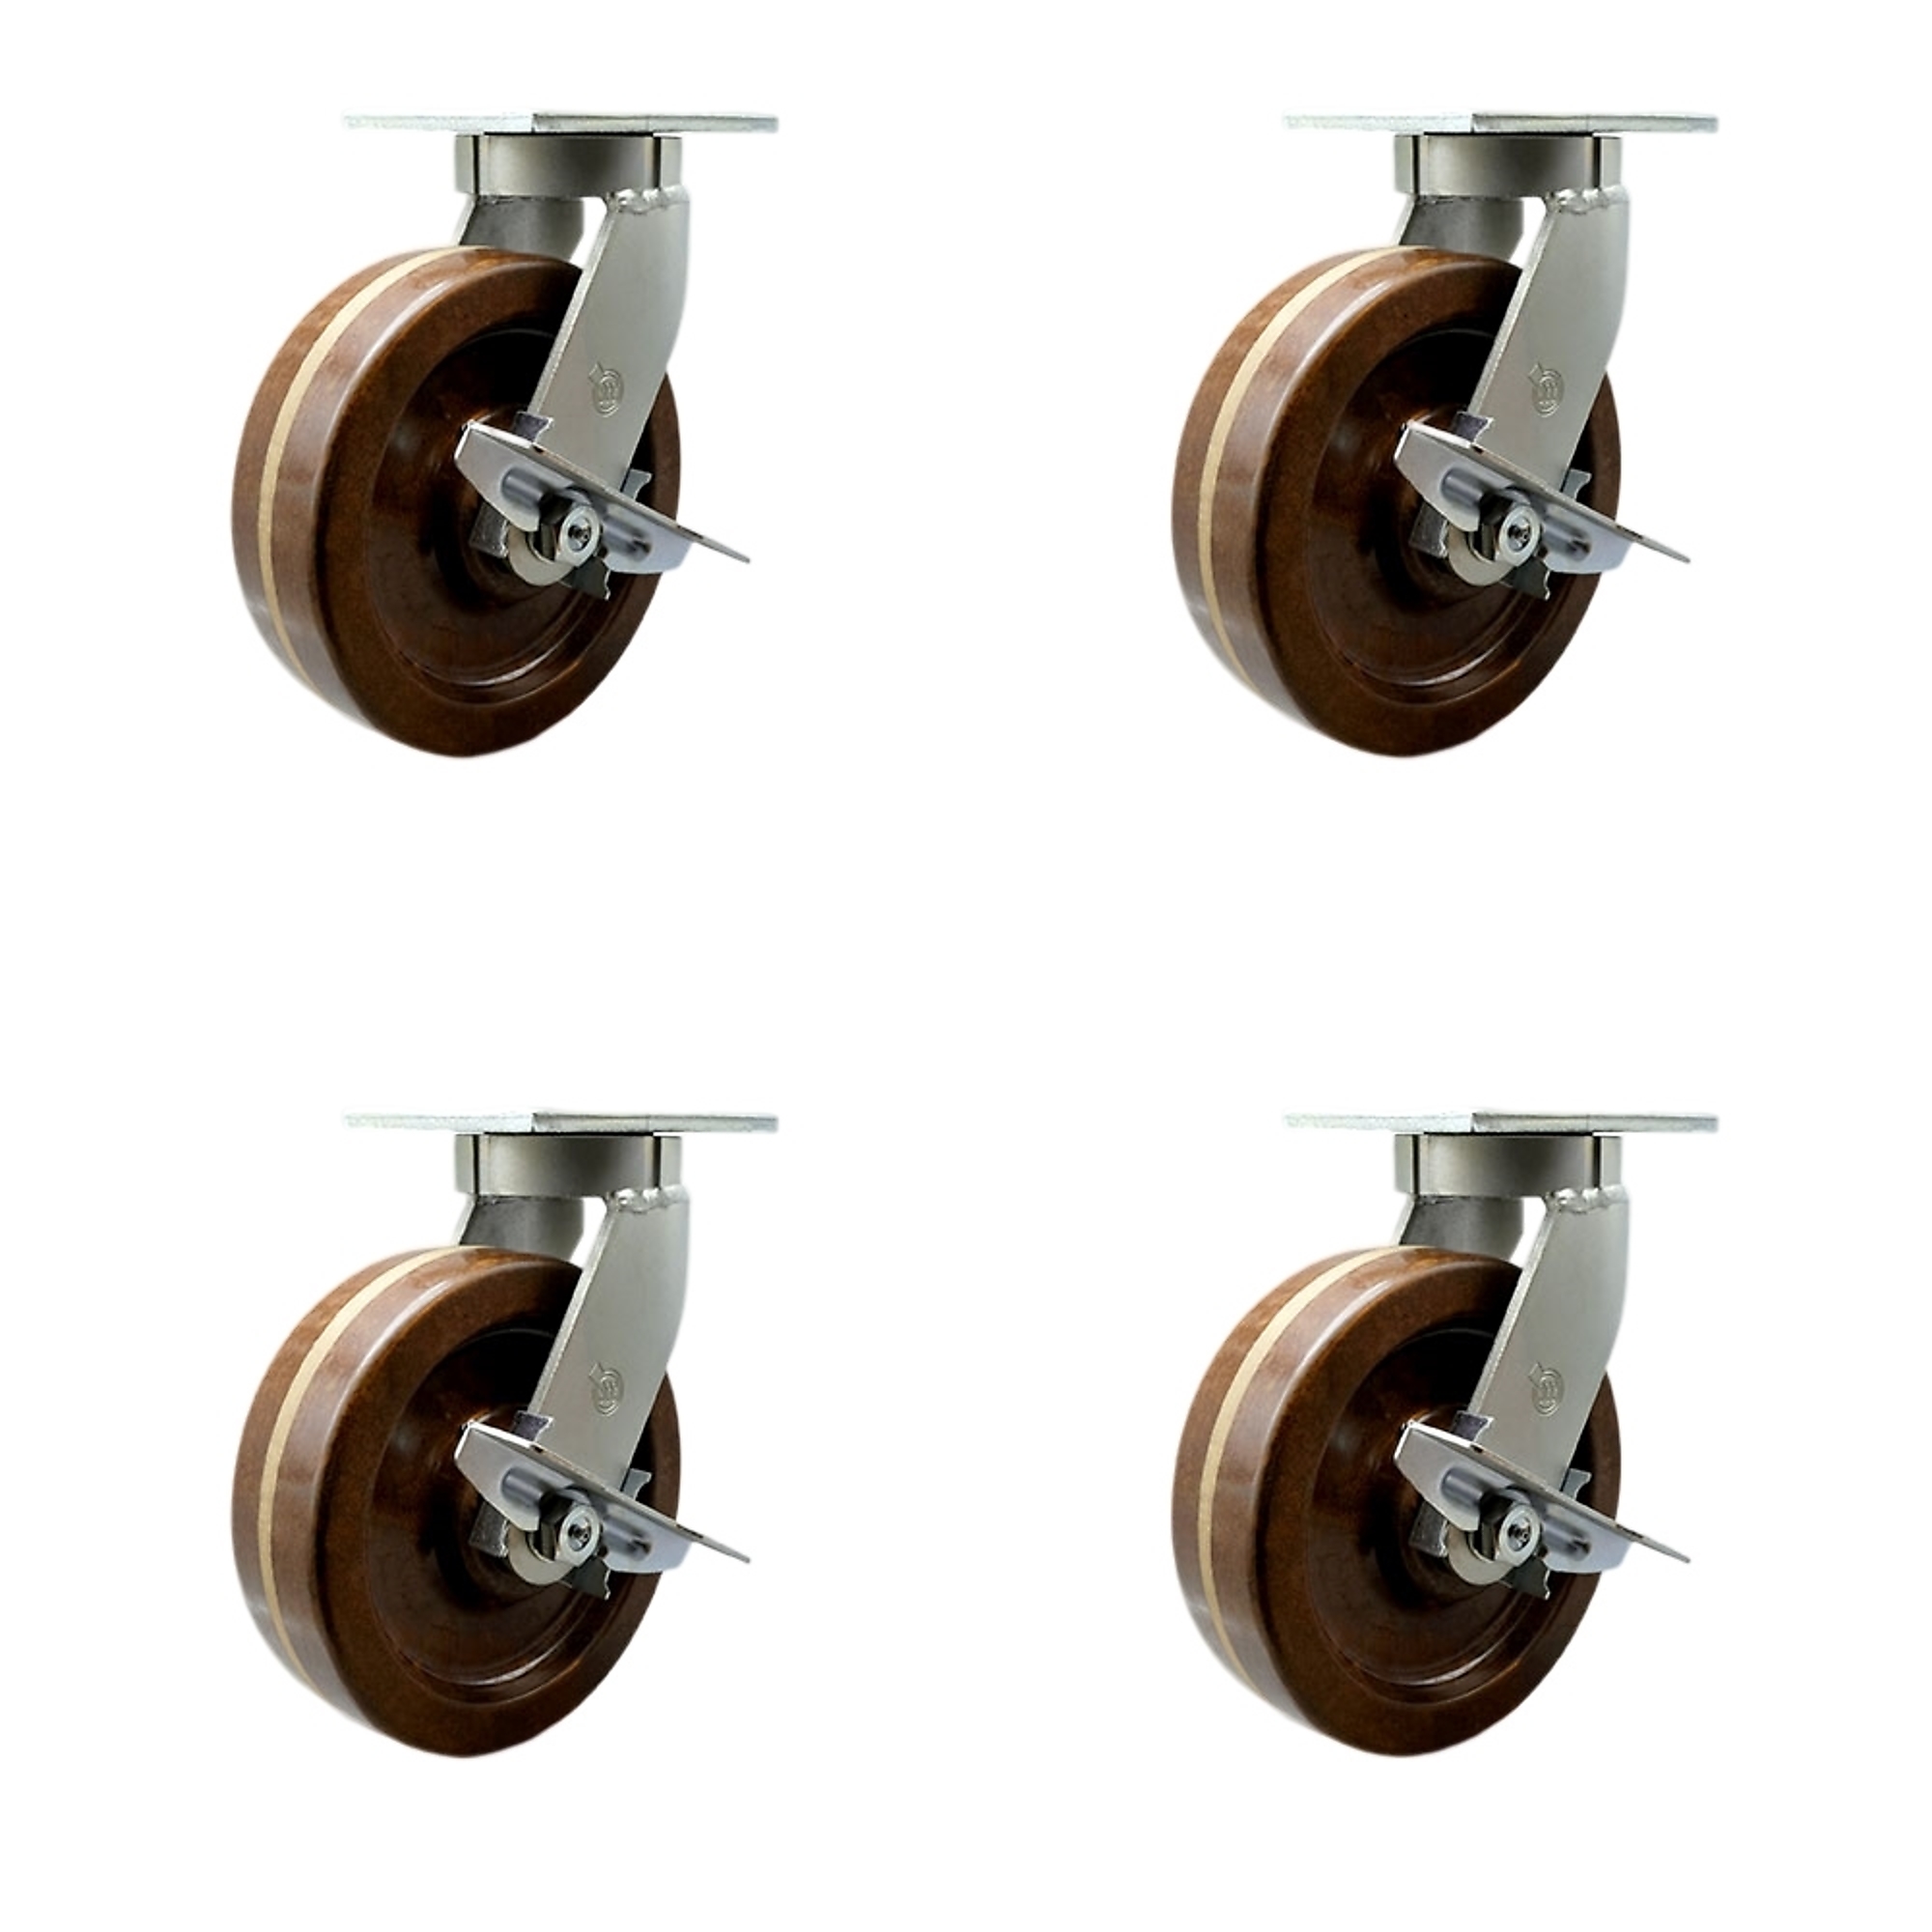 Service Caster, 8Inch x 3Inch Plate Casters, Wheel Diameter 8 in, Caster Type Swivel, Package (qty.) 4, Model SCC-KP92S830-PHRHT-SLB-BSL-2-SLB-2